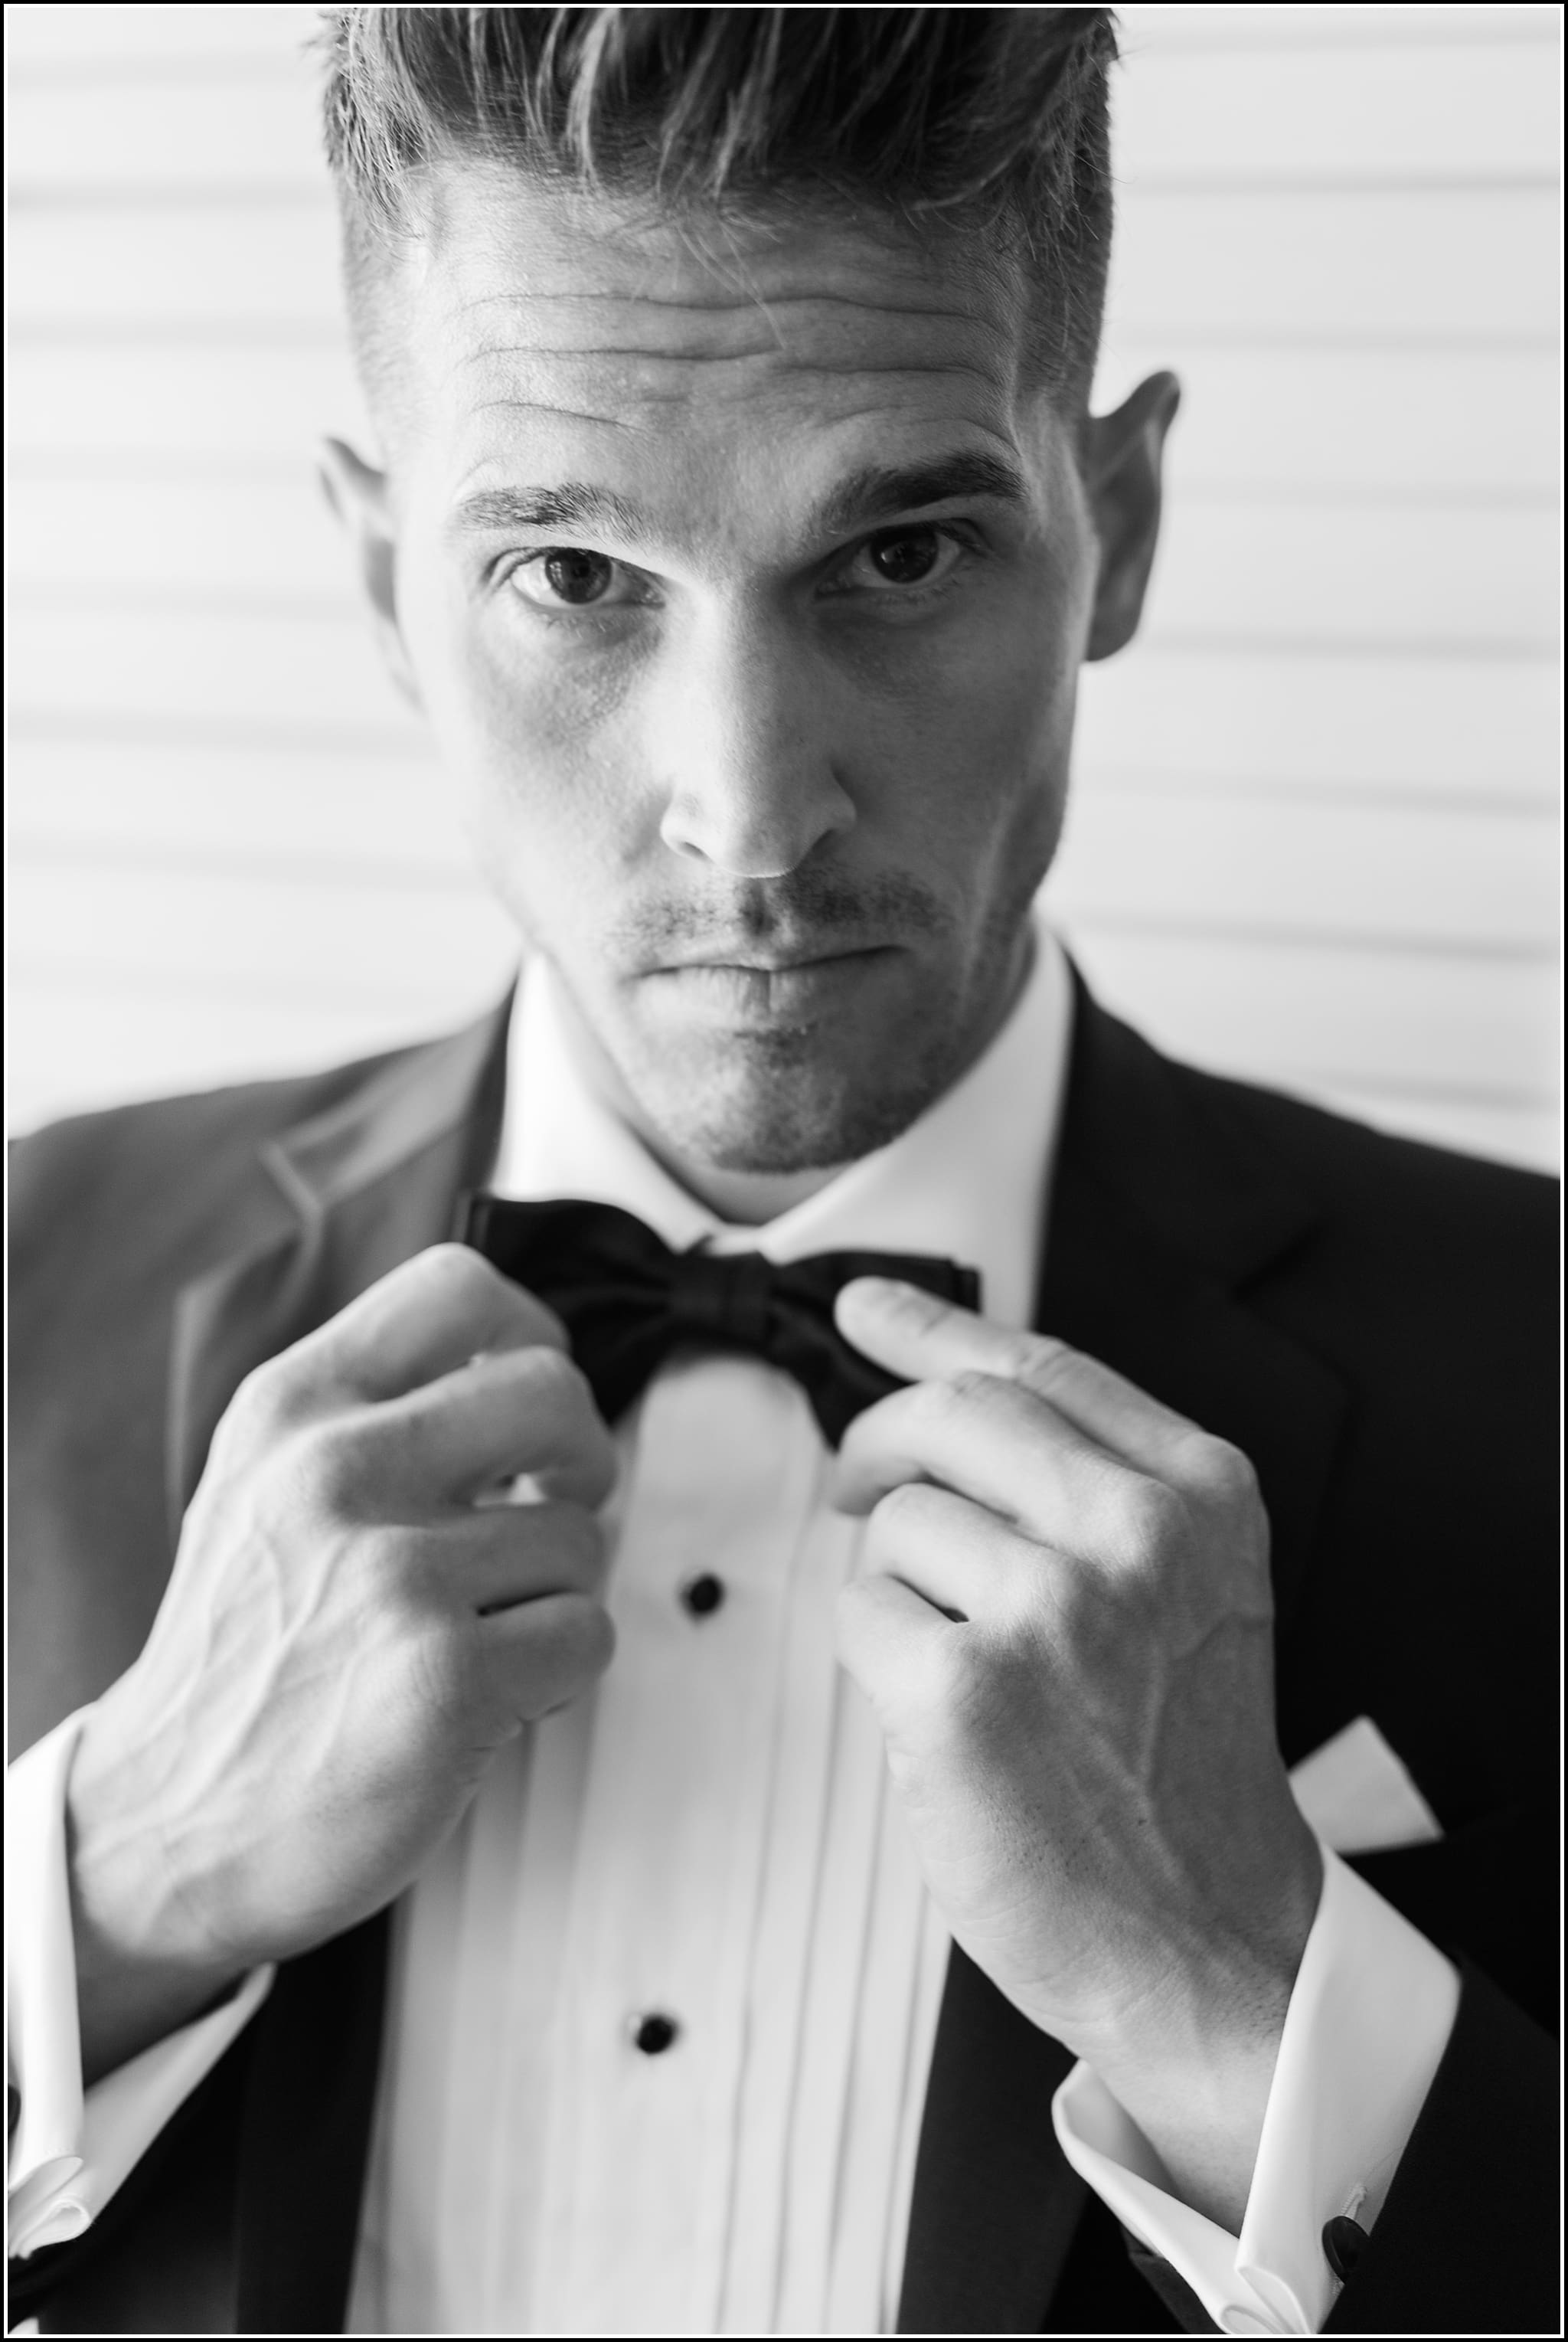  favorite wedding images 2016, wedding photos from 2016, our favorite wedding photos, waldorf wedding, groom portrait, black and white groom portrait, groom getting ready portrait